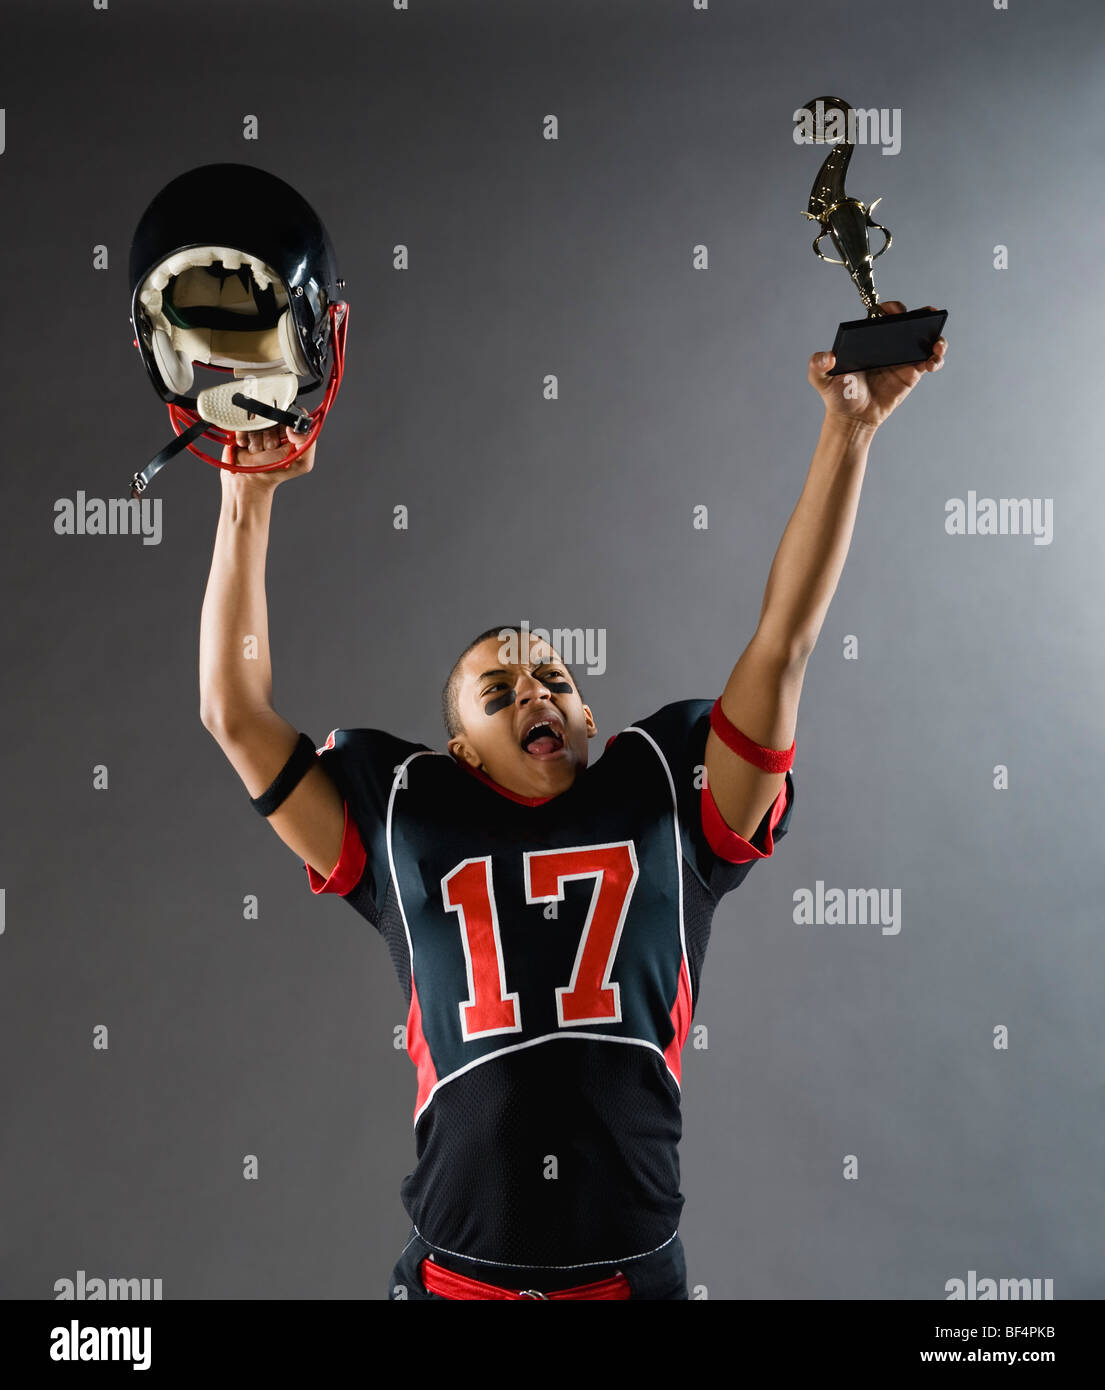 Mixed race football player holding helmet and trophy overhead Stock Photo